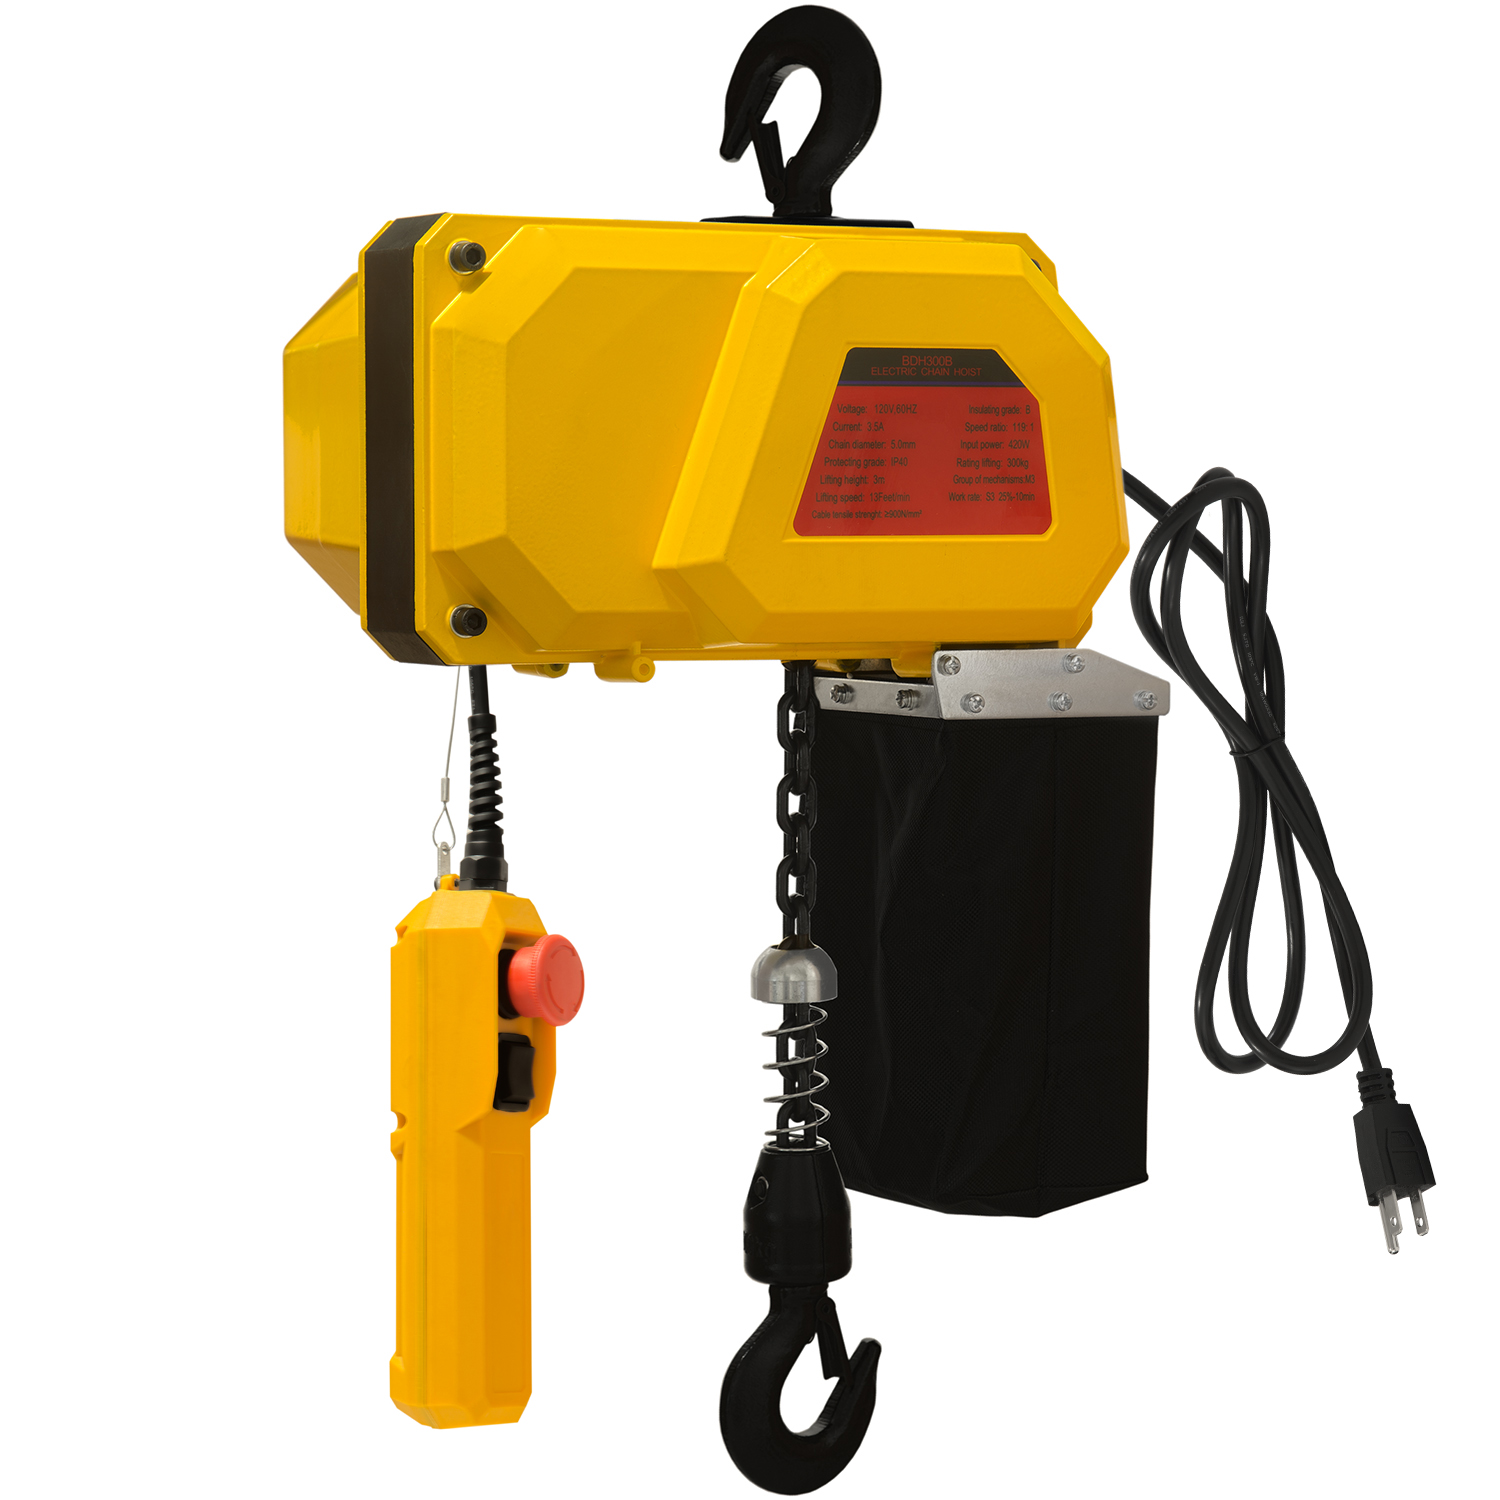 Admalite 660 lbs Electric Chain Hoist with Pendant control presented in a white background